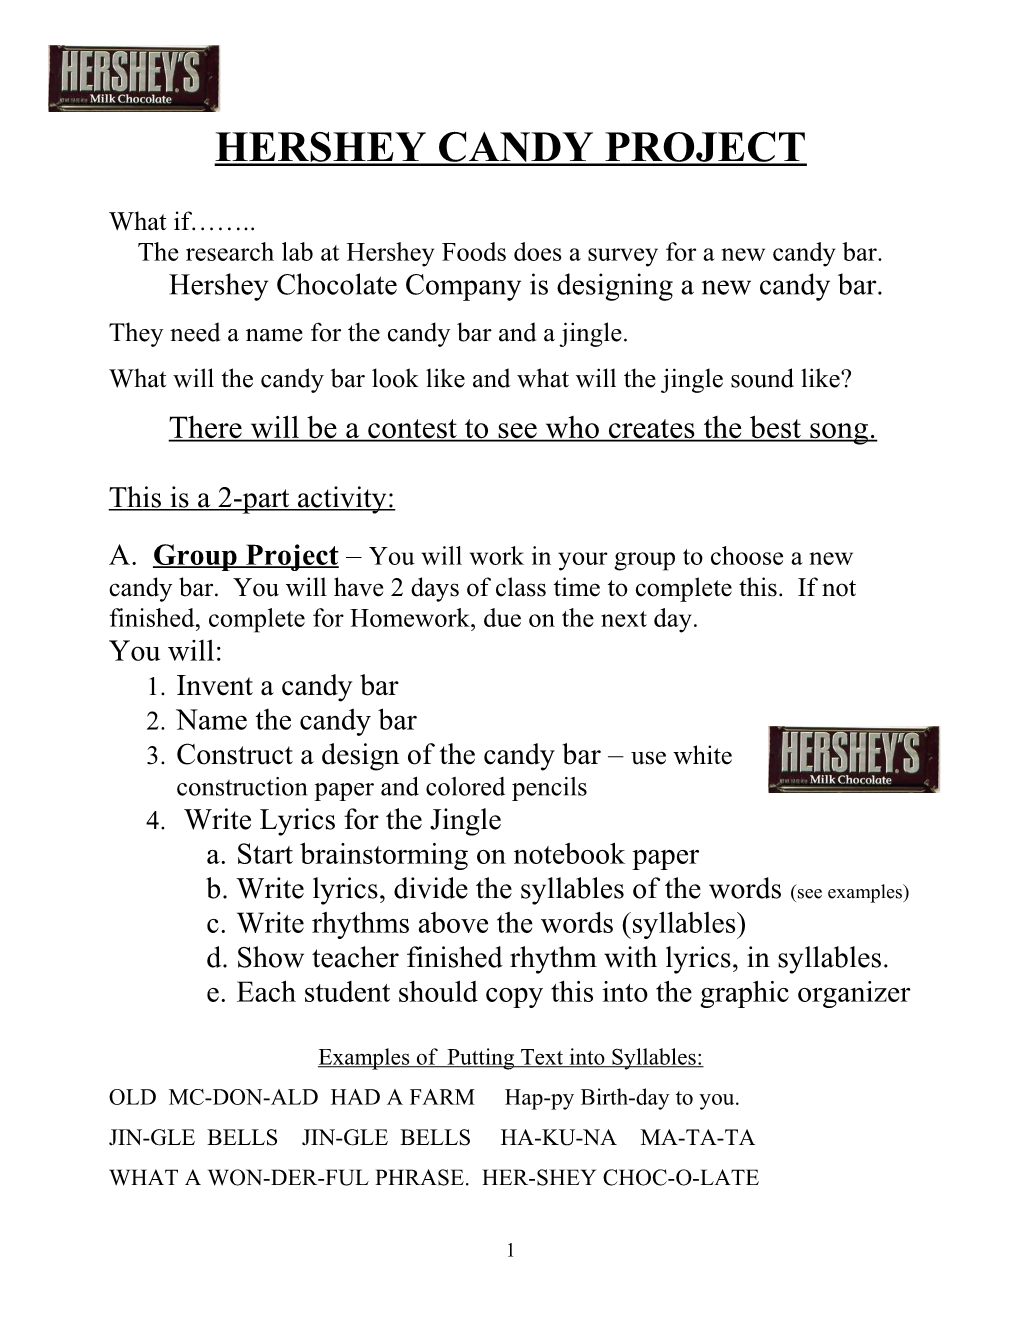 Hershey Candy Project